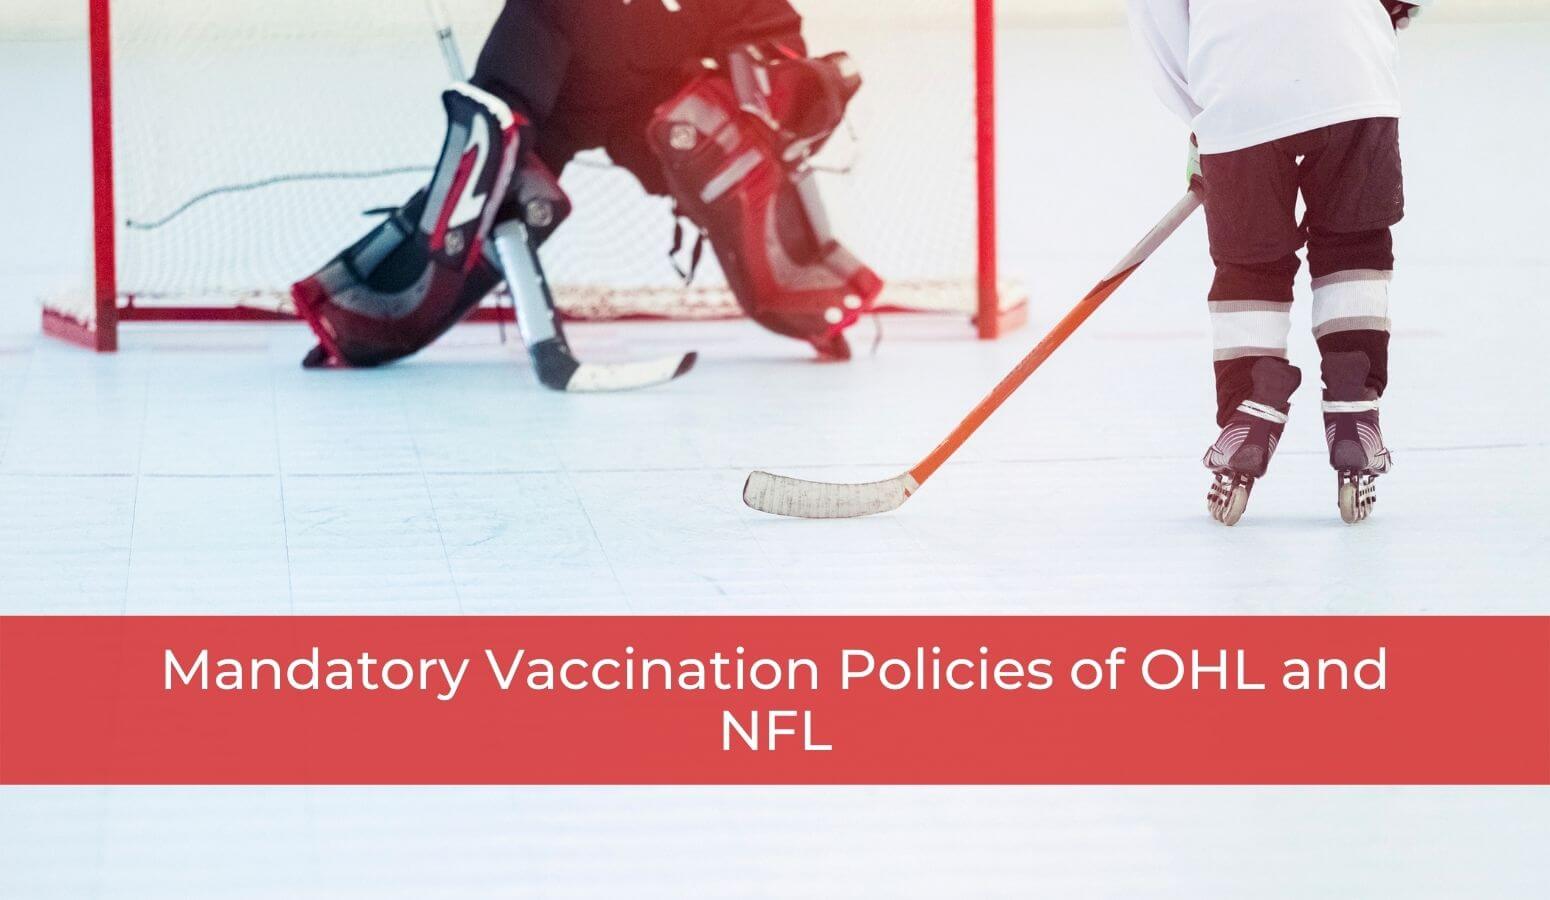 OHL Vaccination Policy